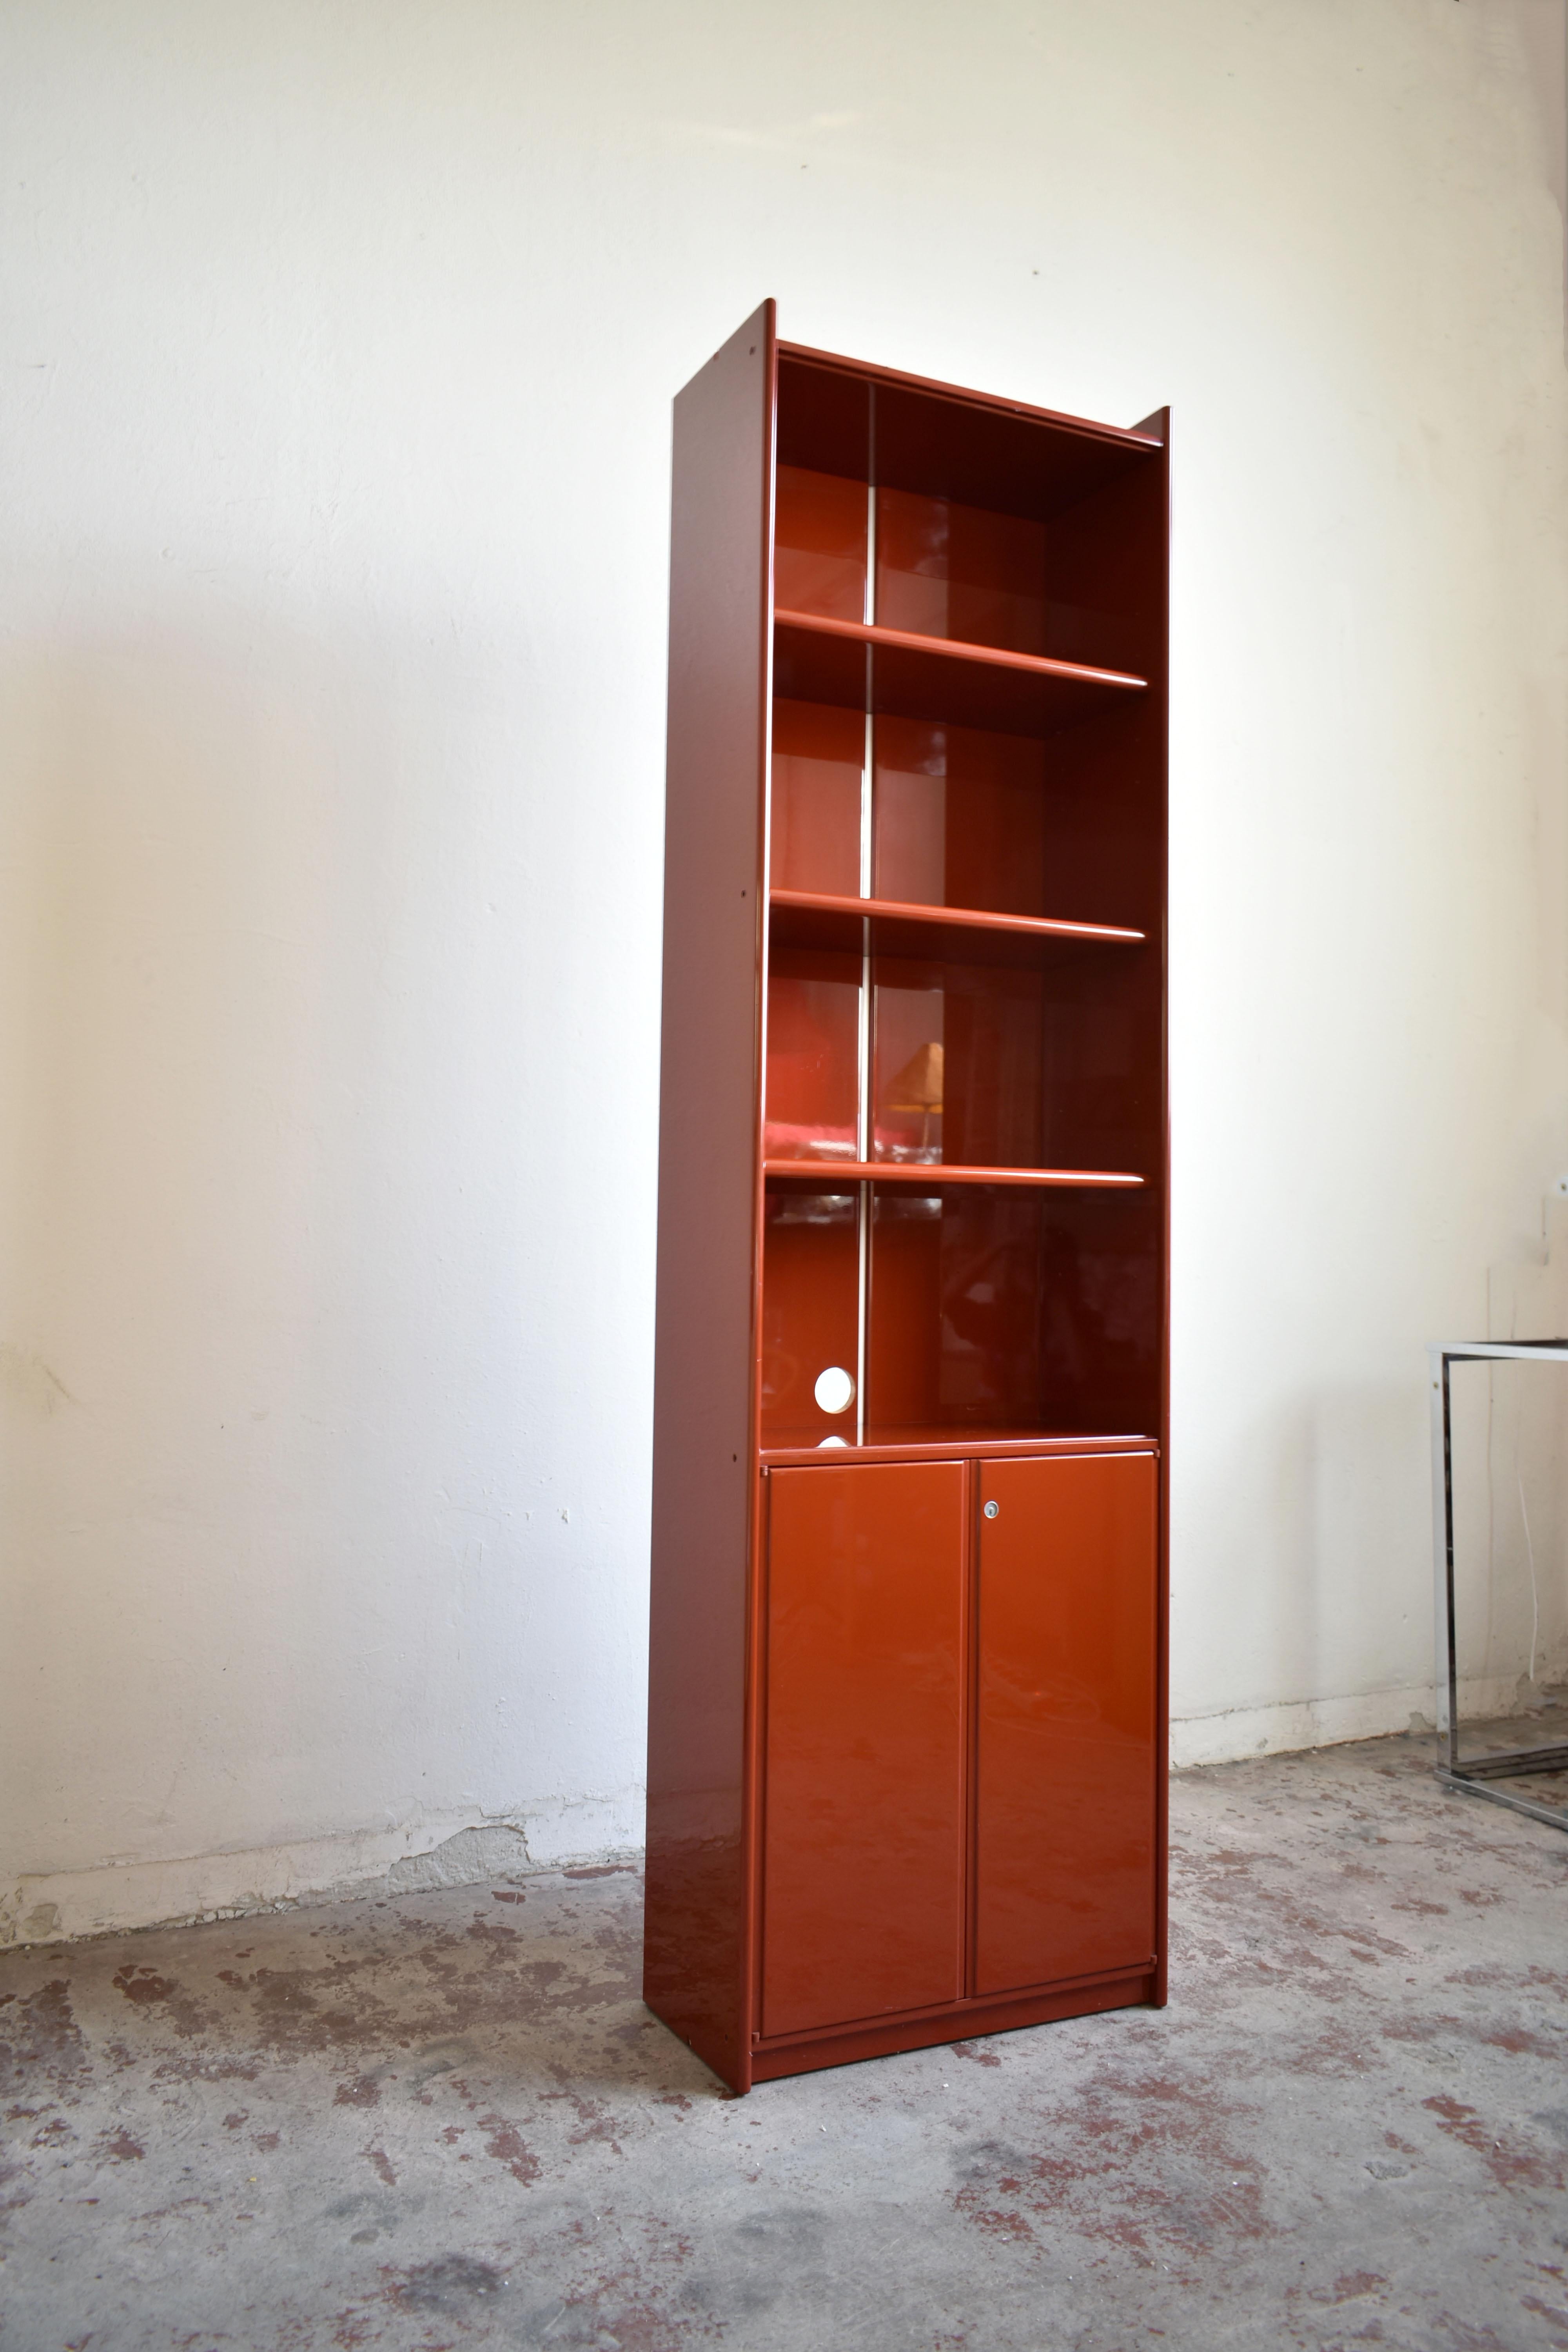 The 'Olinto' bookcase was designed by Kazuhide Takahama in 1965 for the world-famous Italian high-end furniture company B&B Italia

The one offered here for sale is composed of two separate units made of wood lacquered in beautiful brick red color